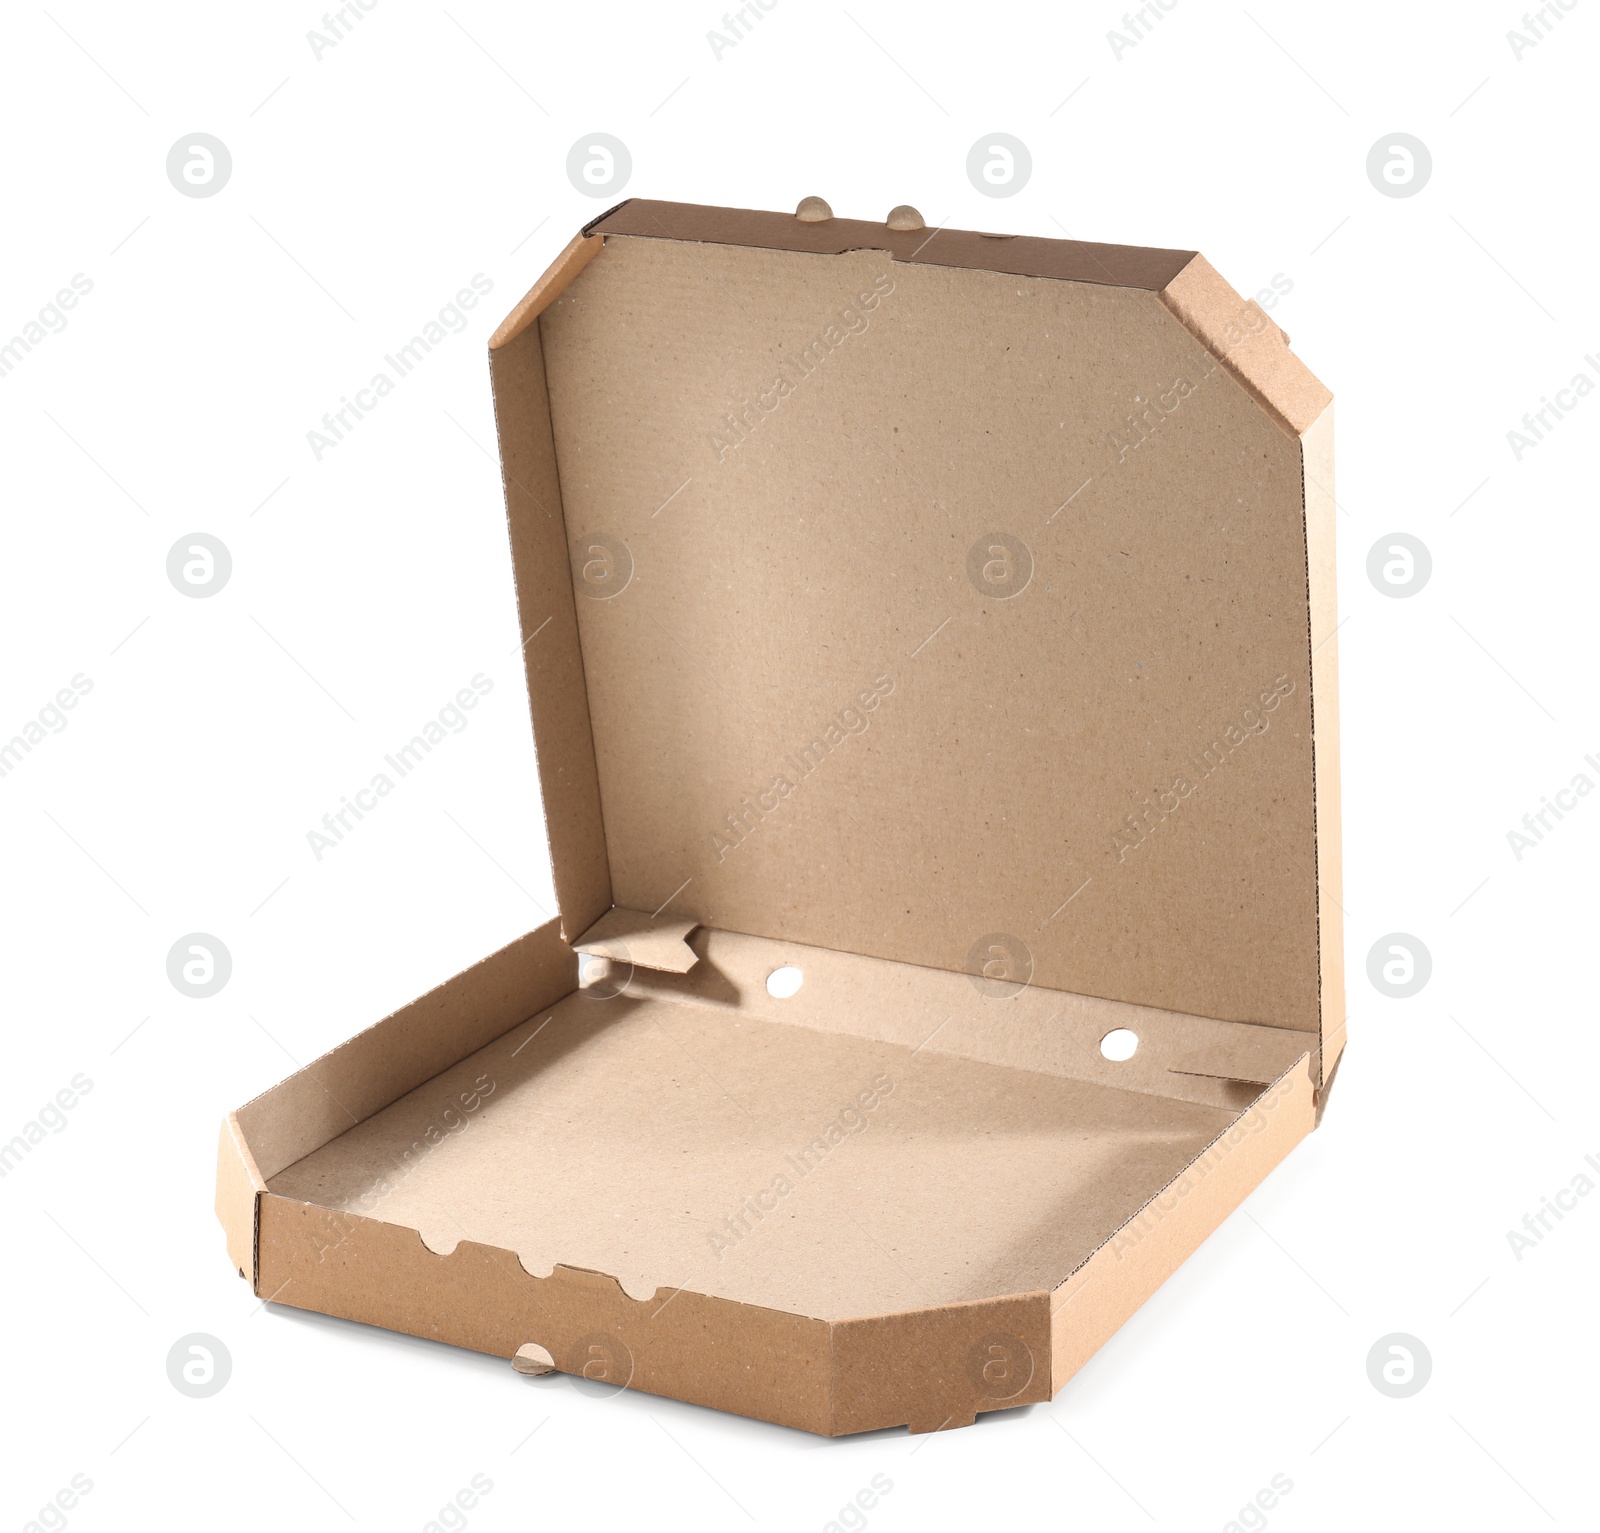 Photo of Open cardboard pizza box on white background. Food delivery